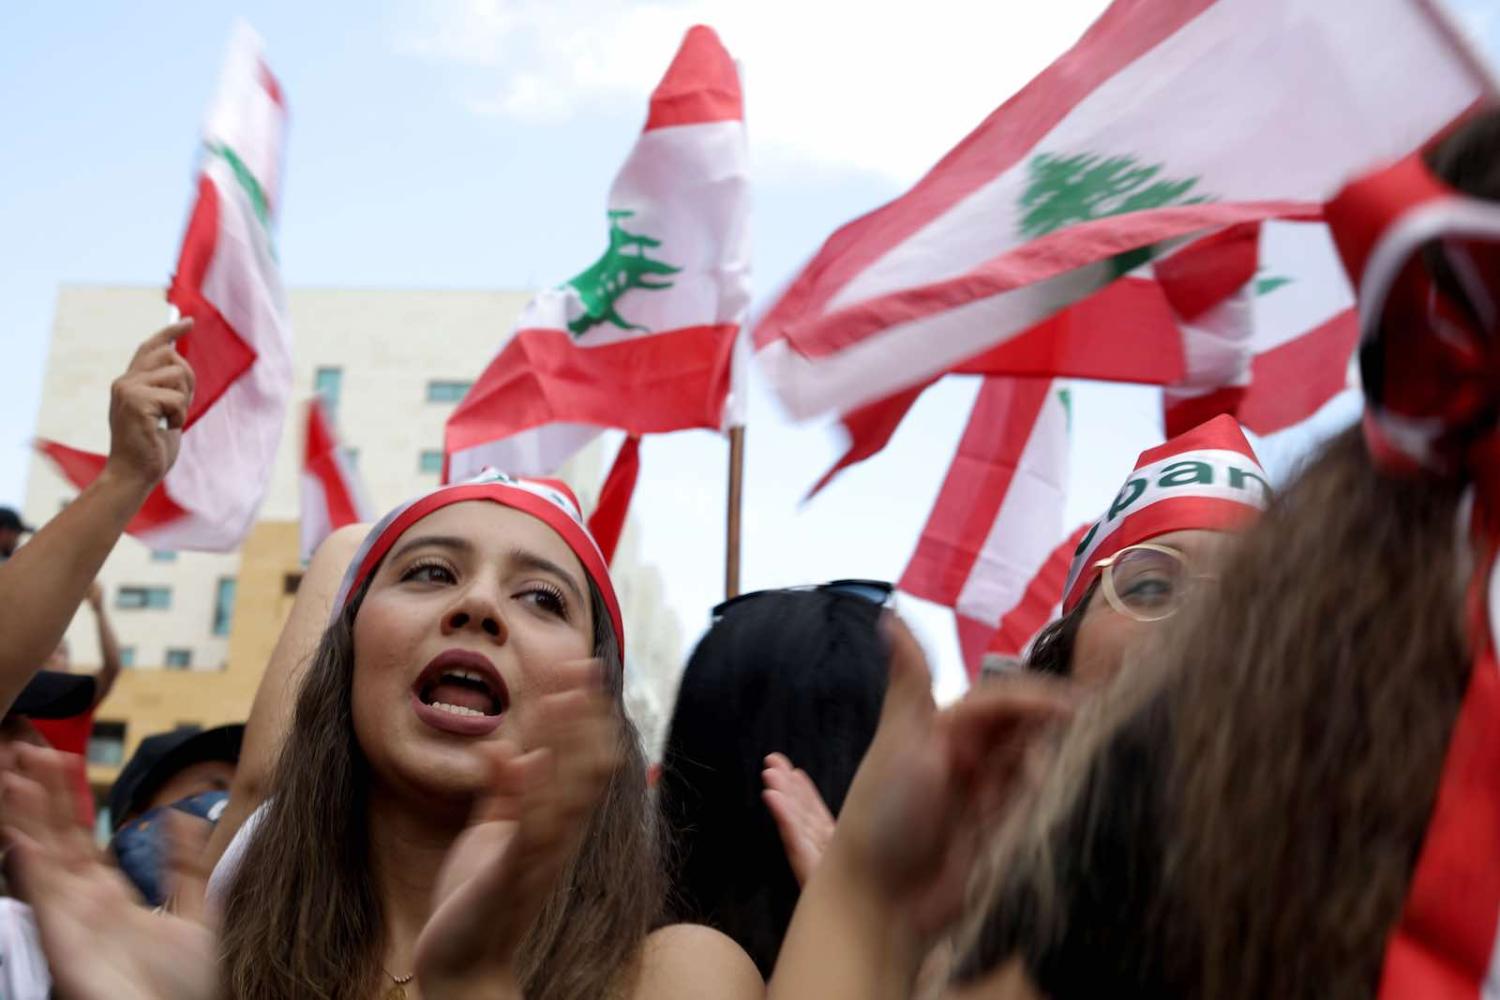 A rally in downtown Beirut on 20 October (Photo: Patrick Baz/AFP/Getty Images)